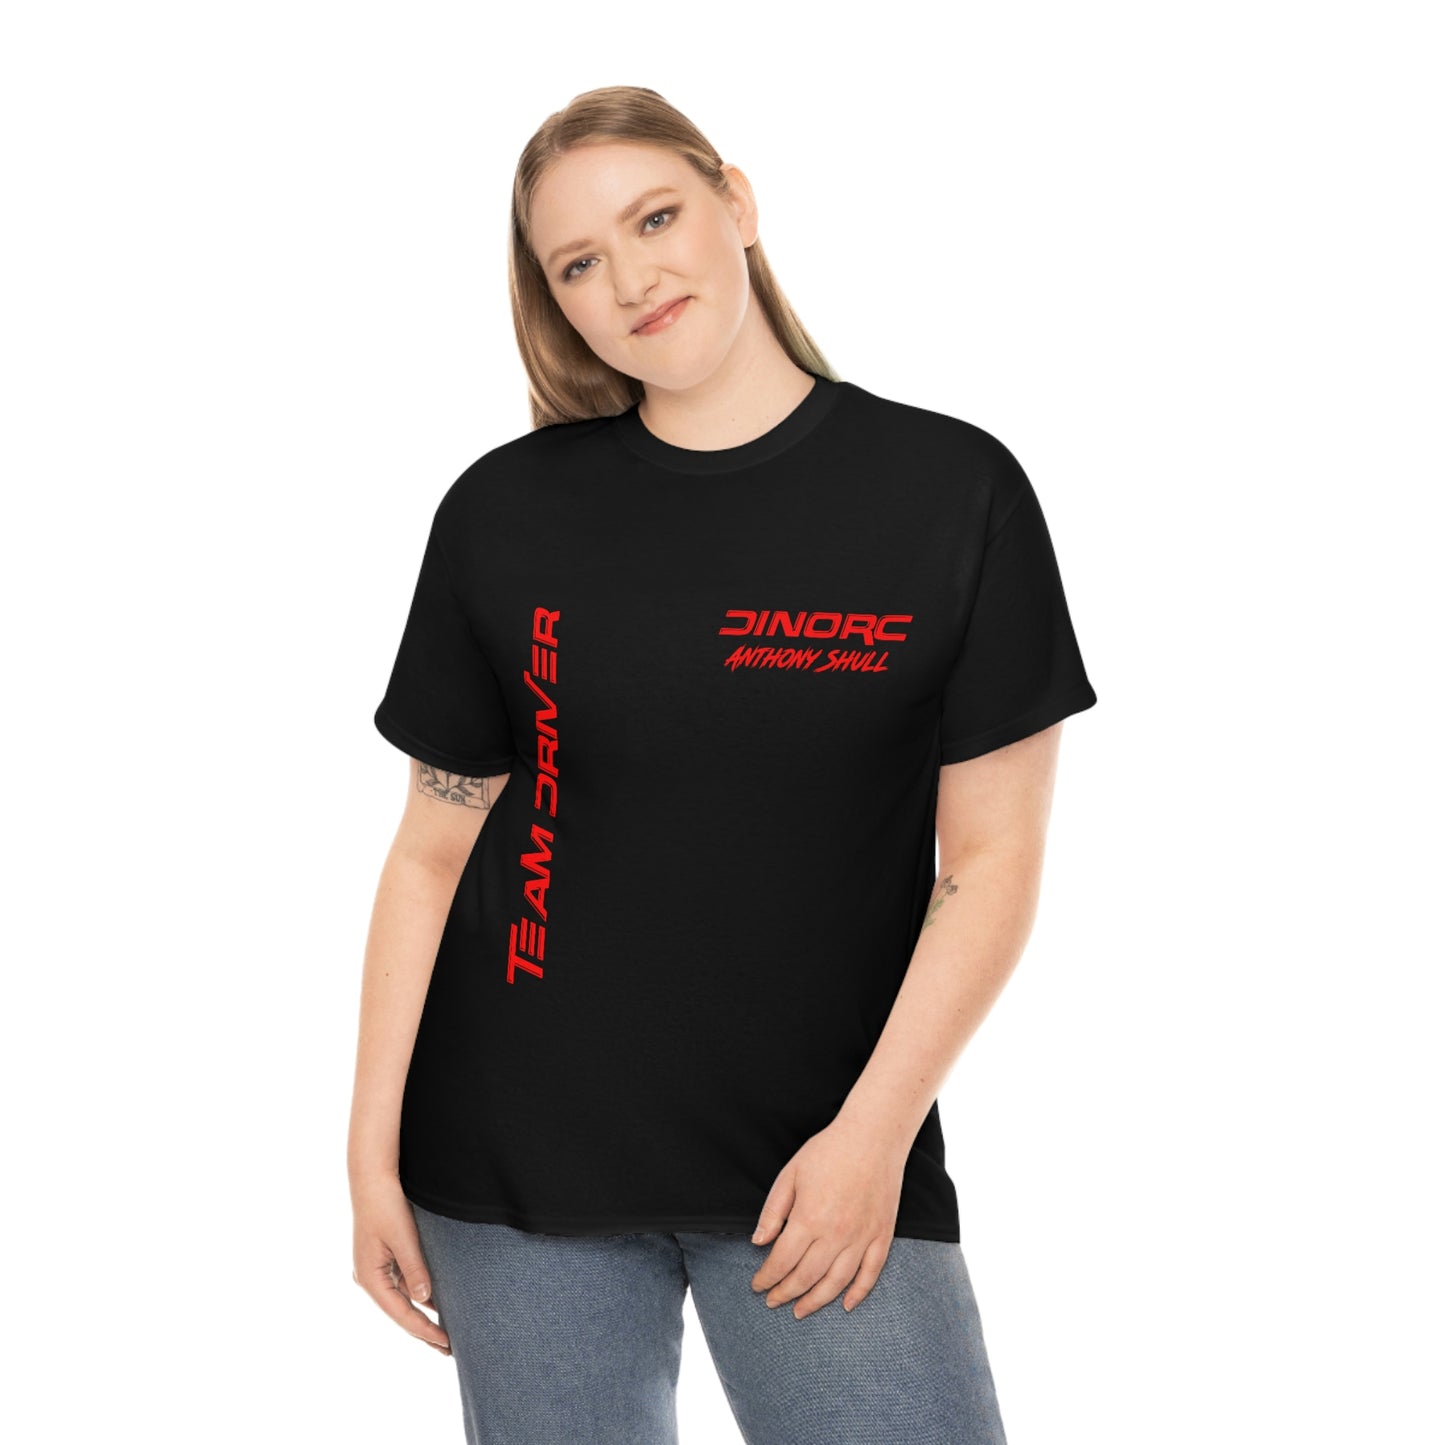 Team Driver Anthony Shull Front and Back DinoRc Logo T-Shirt S-5x 5 colors